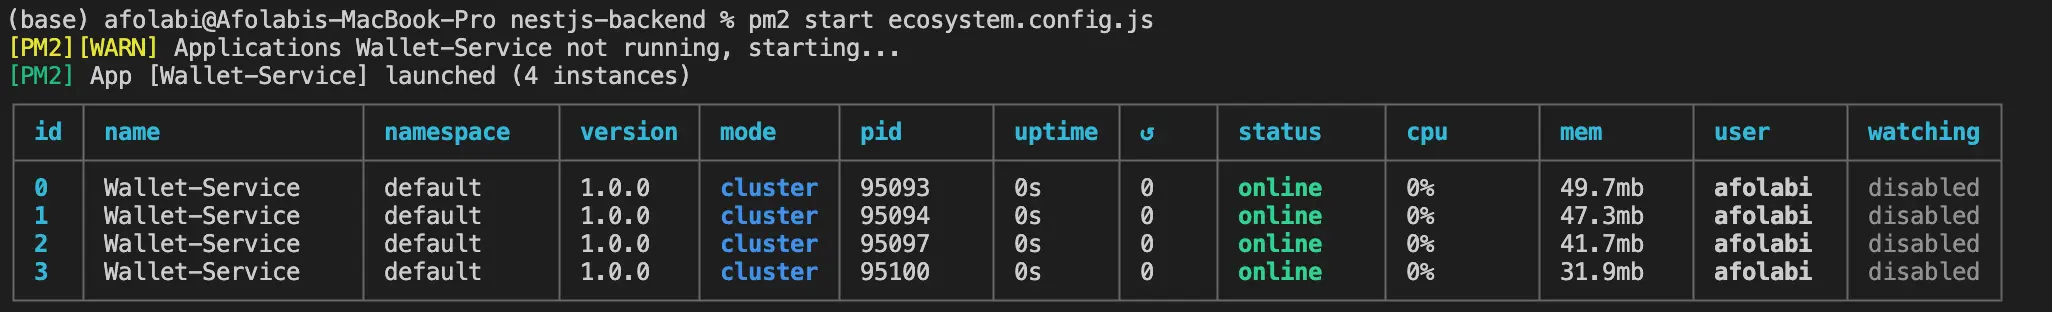 four instances of one app in cluster mode started with ecosystem.config.js